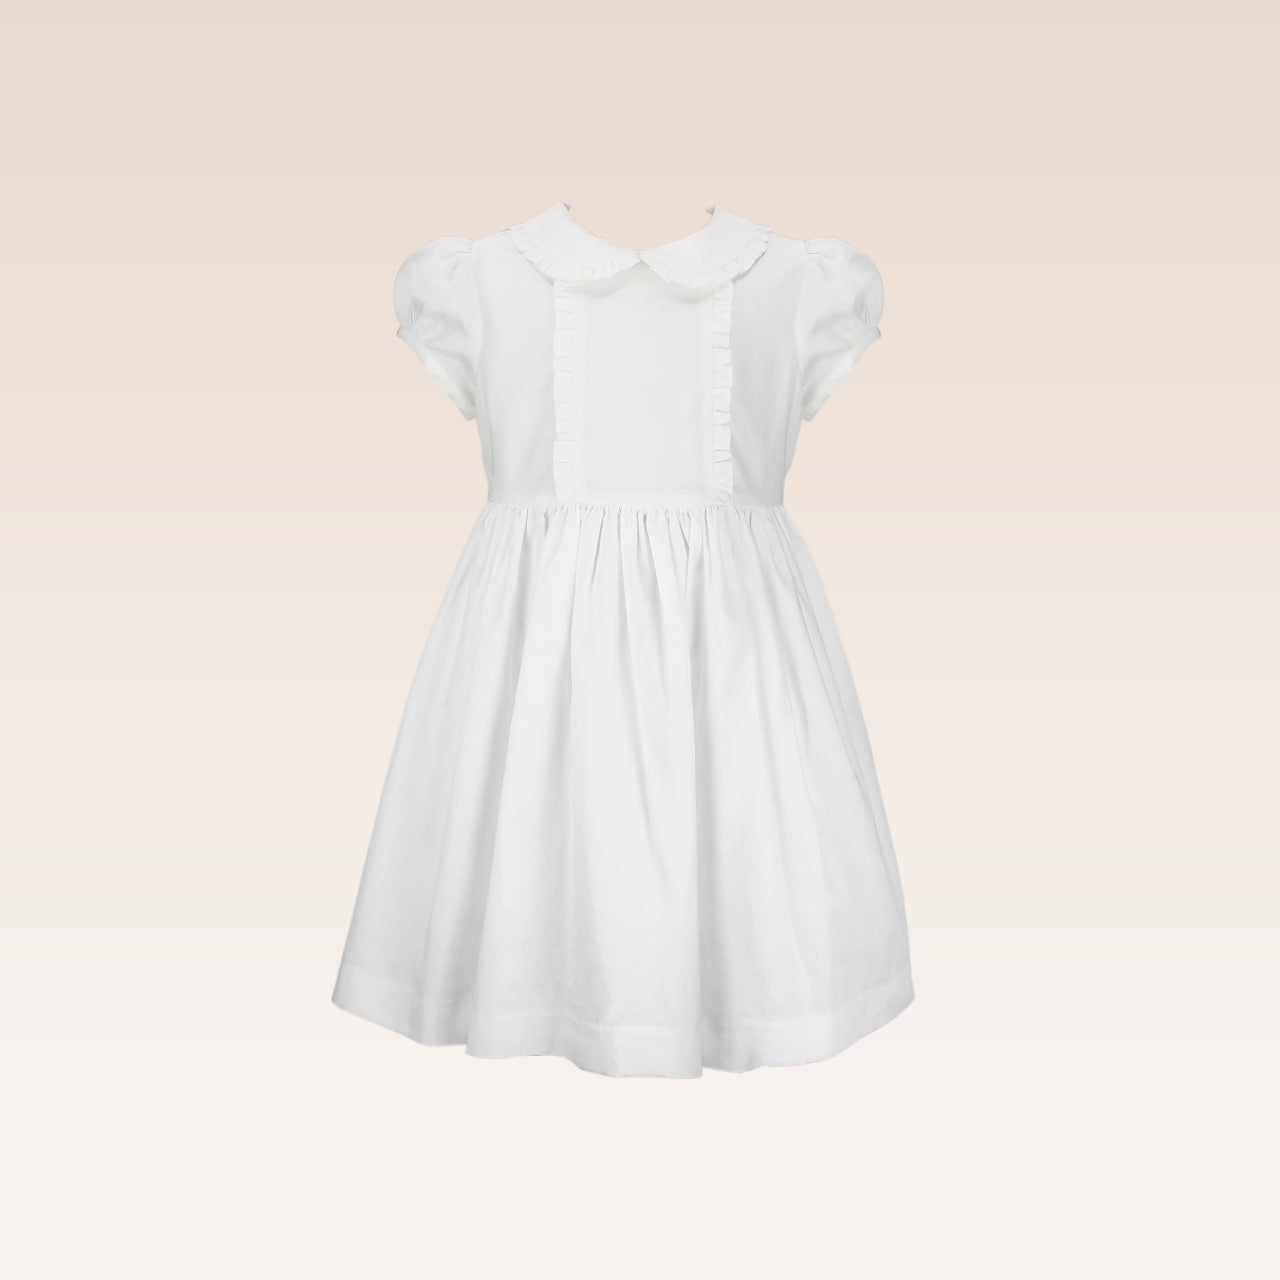 Kasandra Girls White Dress with Ruffles at Front and Collar